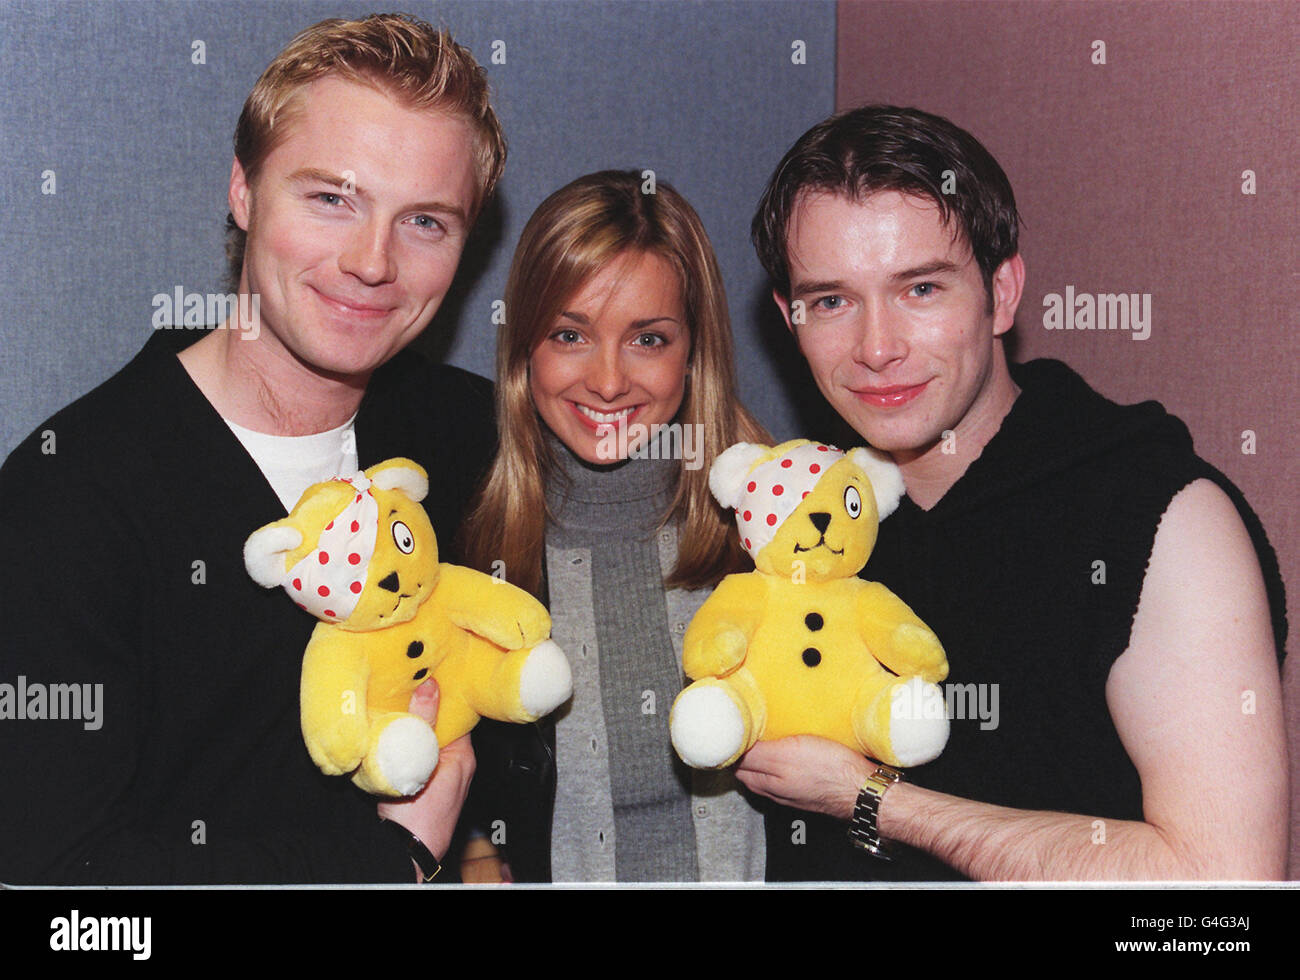 Boyzone stars Ronan Keating (left) and Stephen Gately join singer Louise at Broadcasting House today (Friday) as this year's Children In Need appeal gets under way. Photo by Peter J Jordan/PA Stock Photo